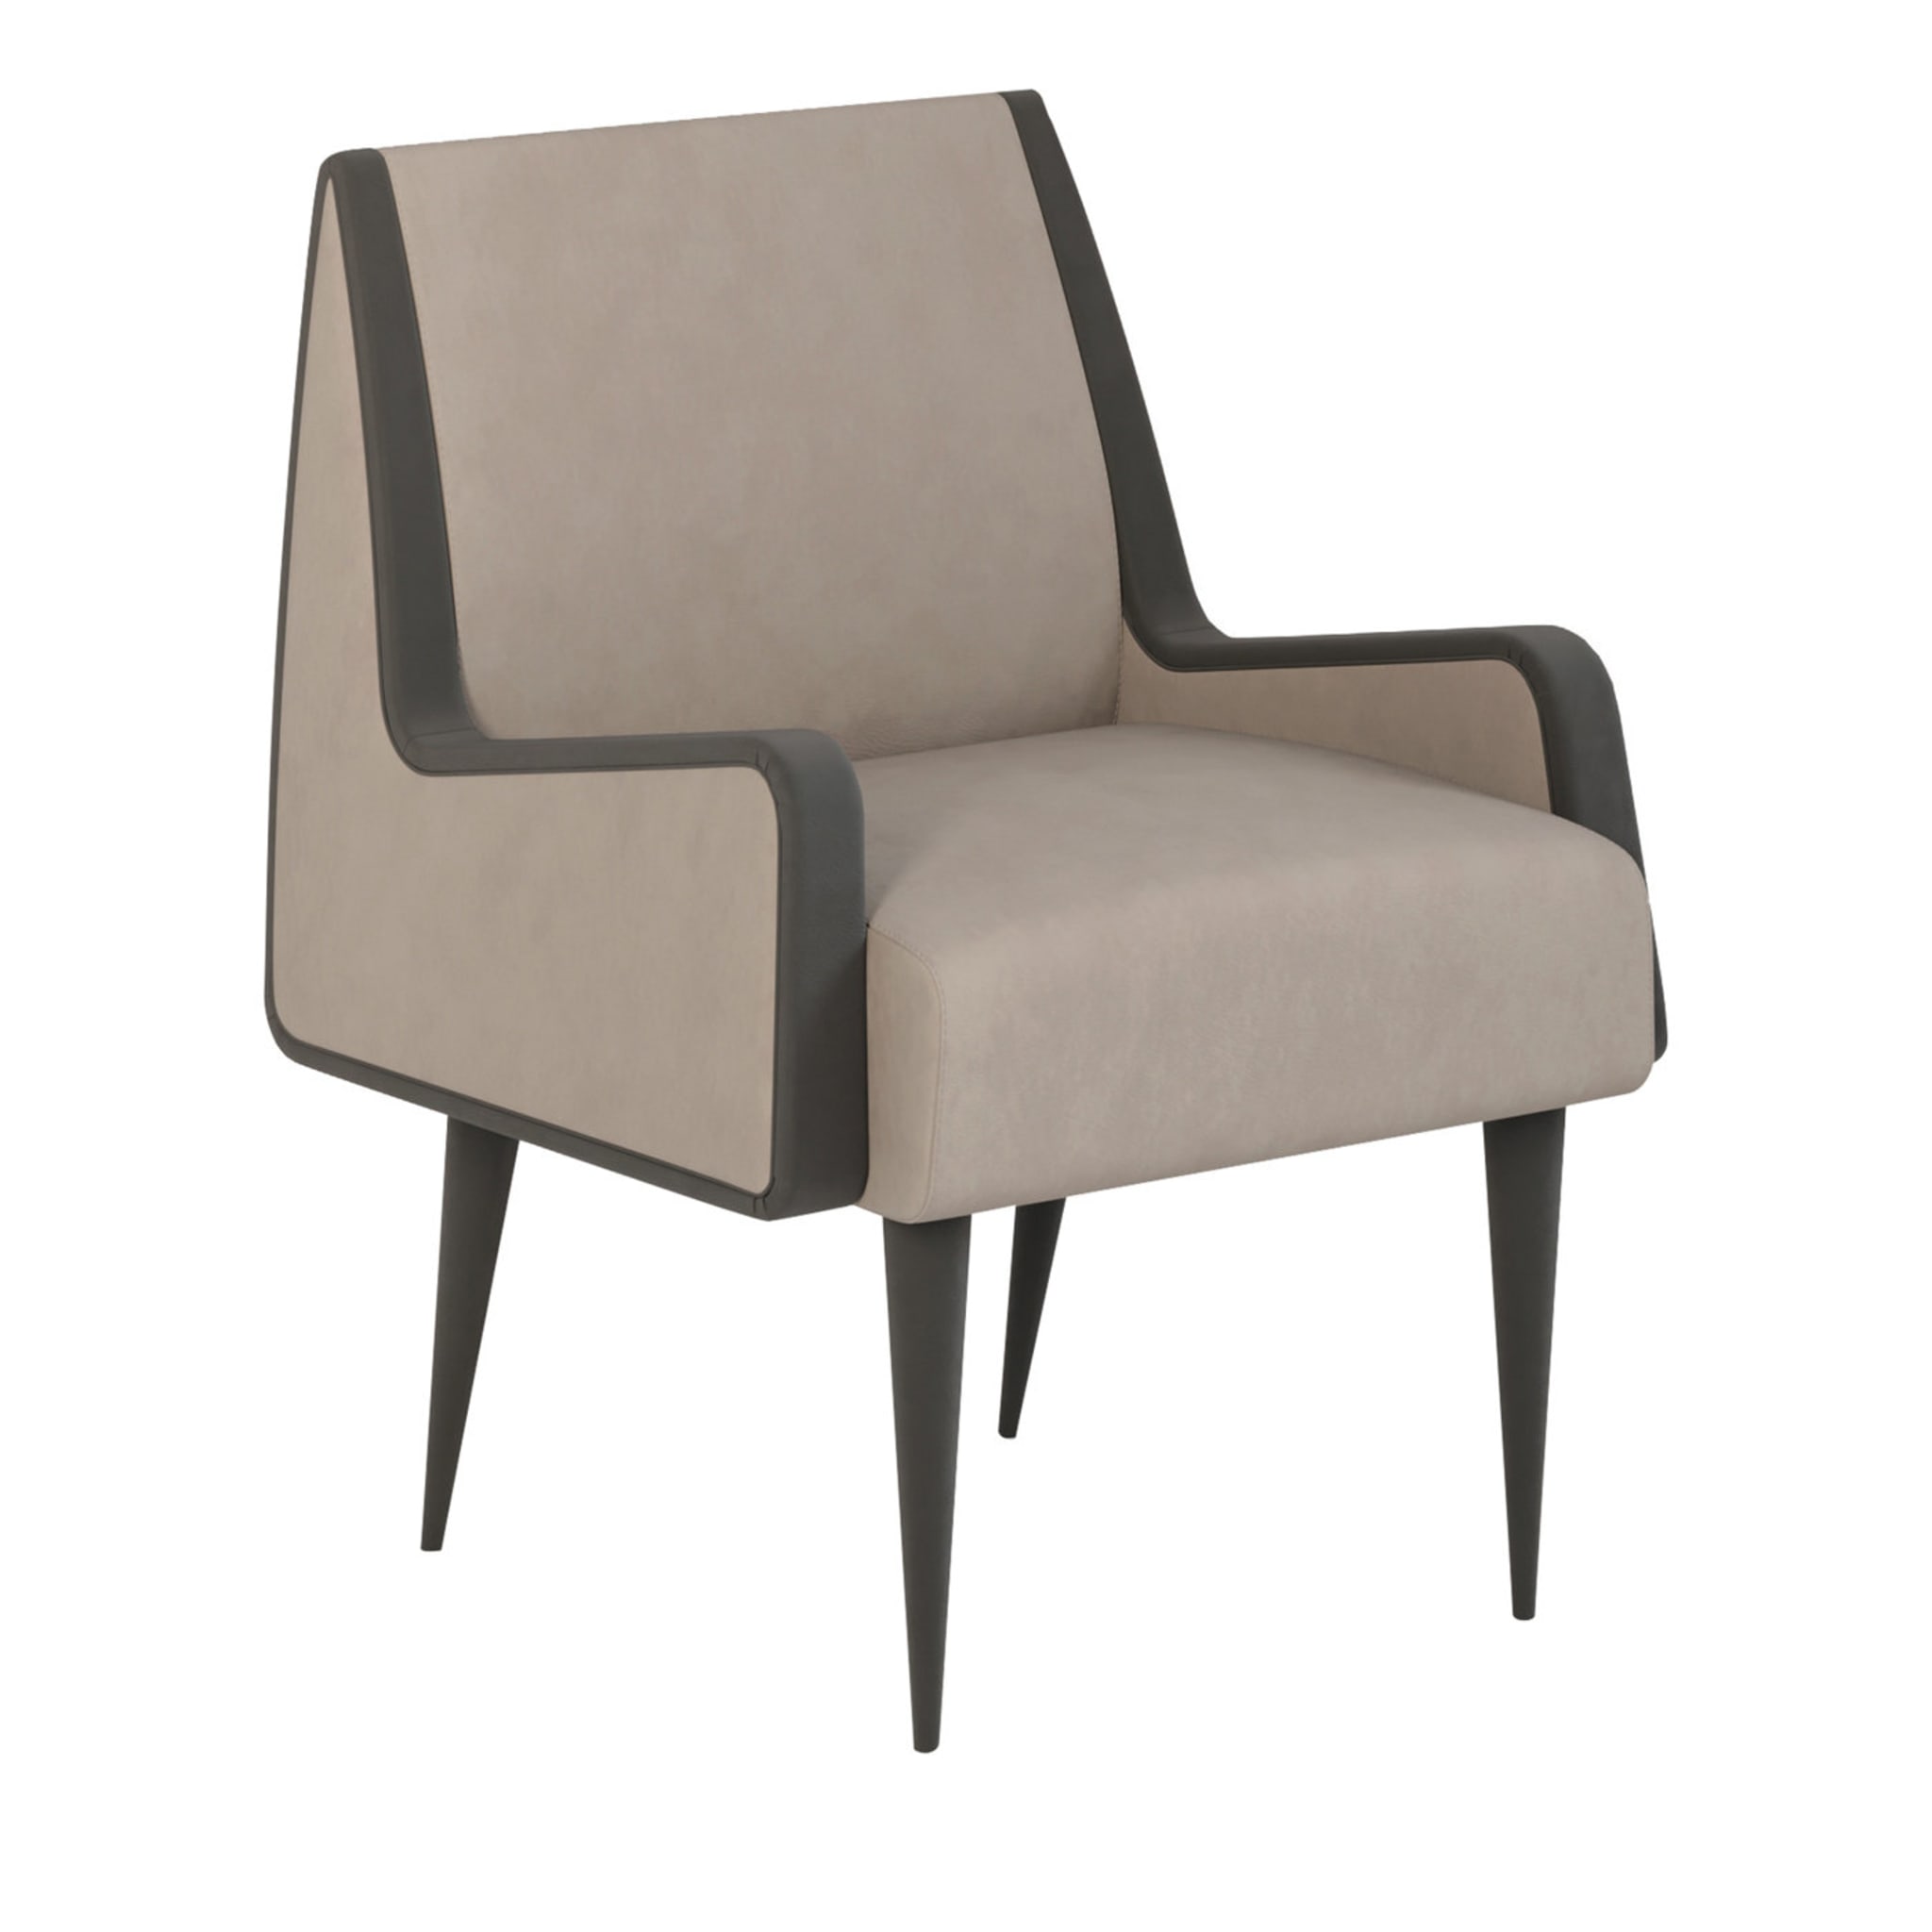 Toluca Dining Chair by Giannella Ventura - Main view